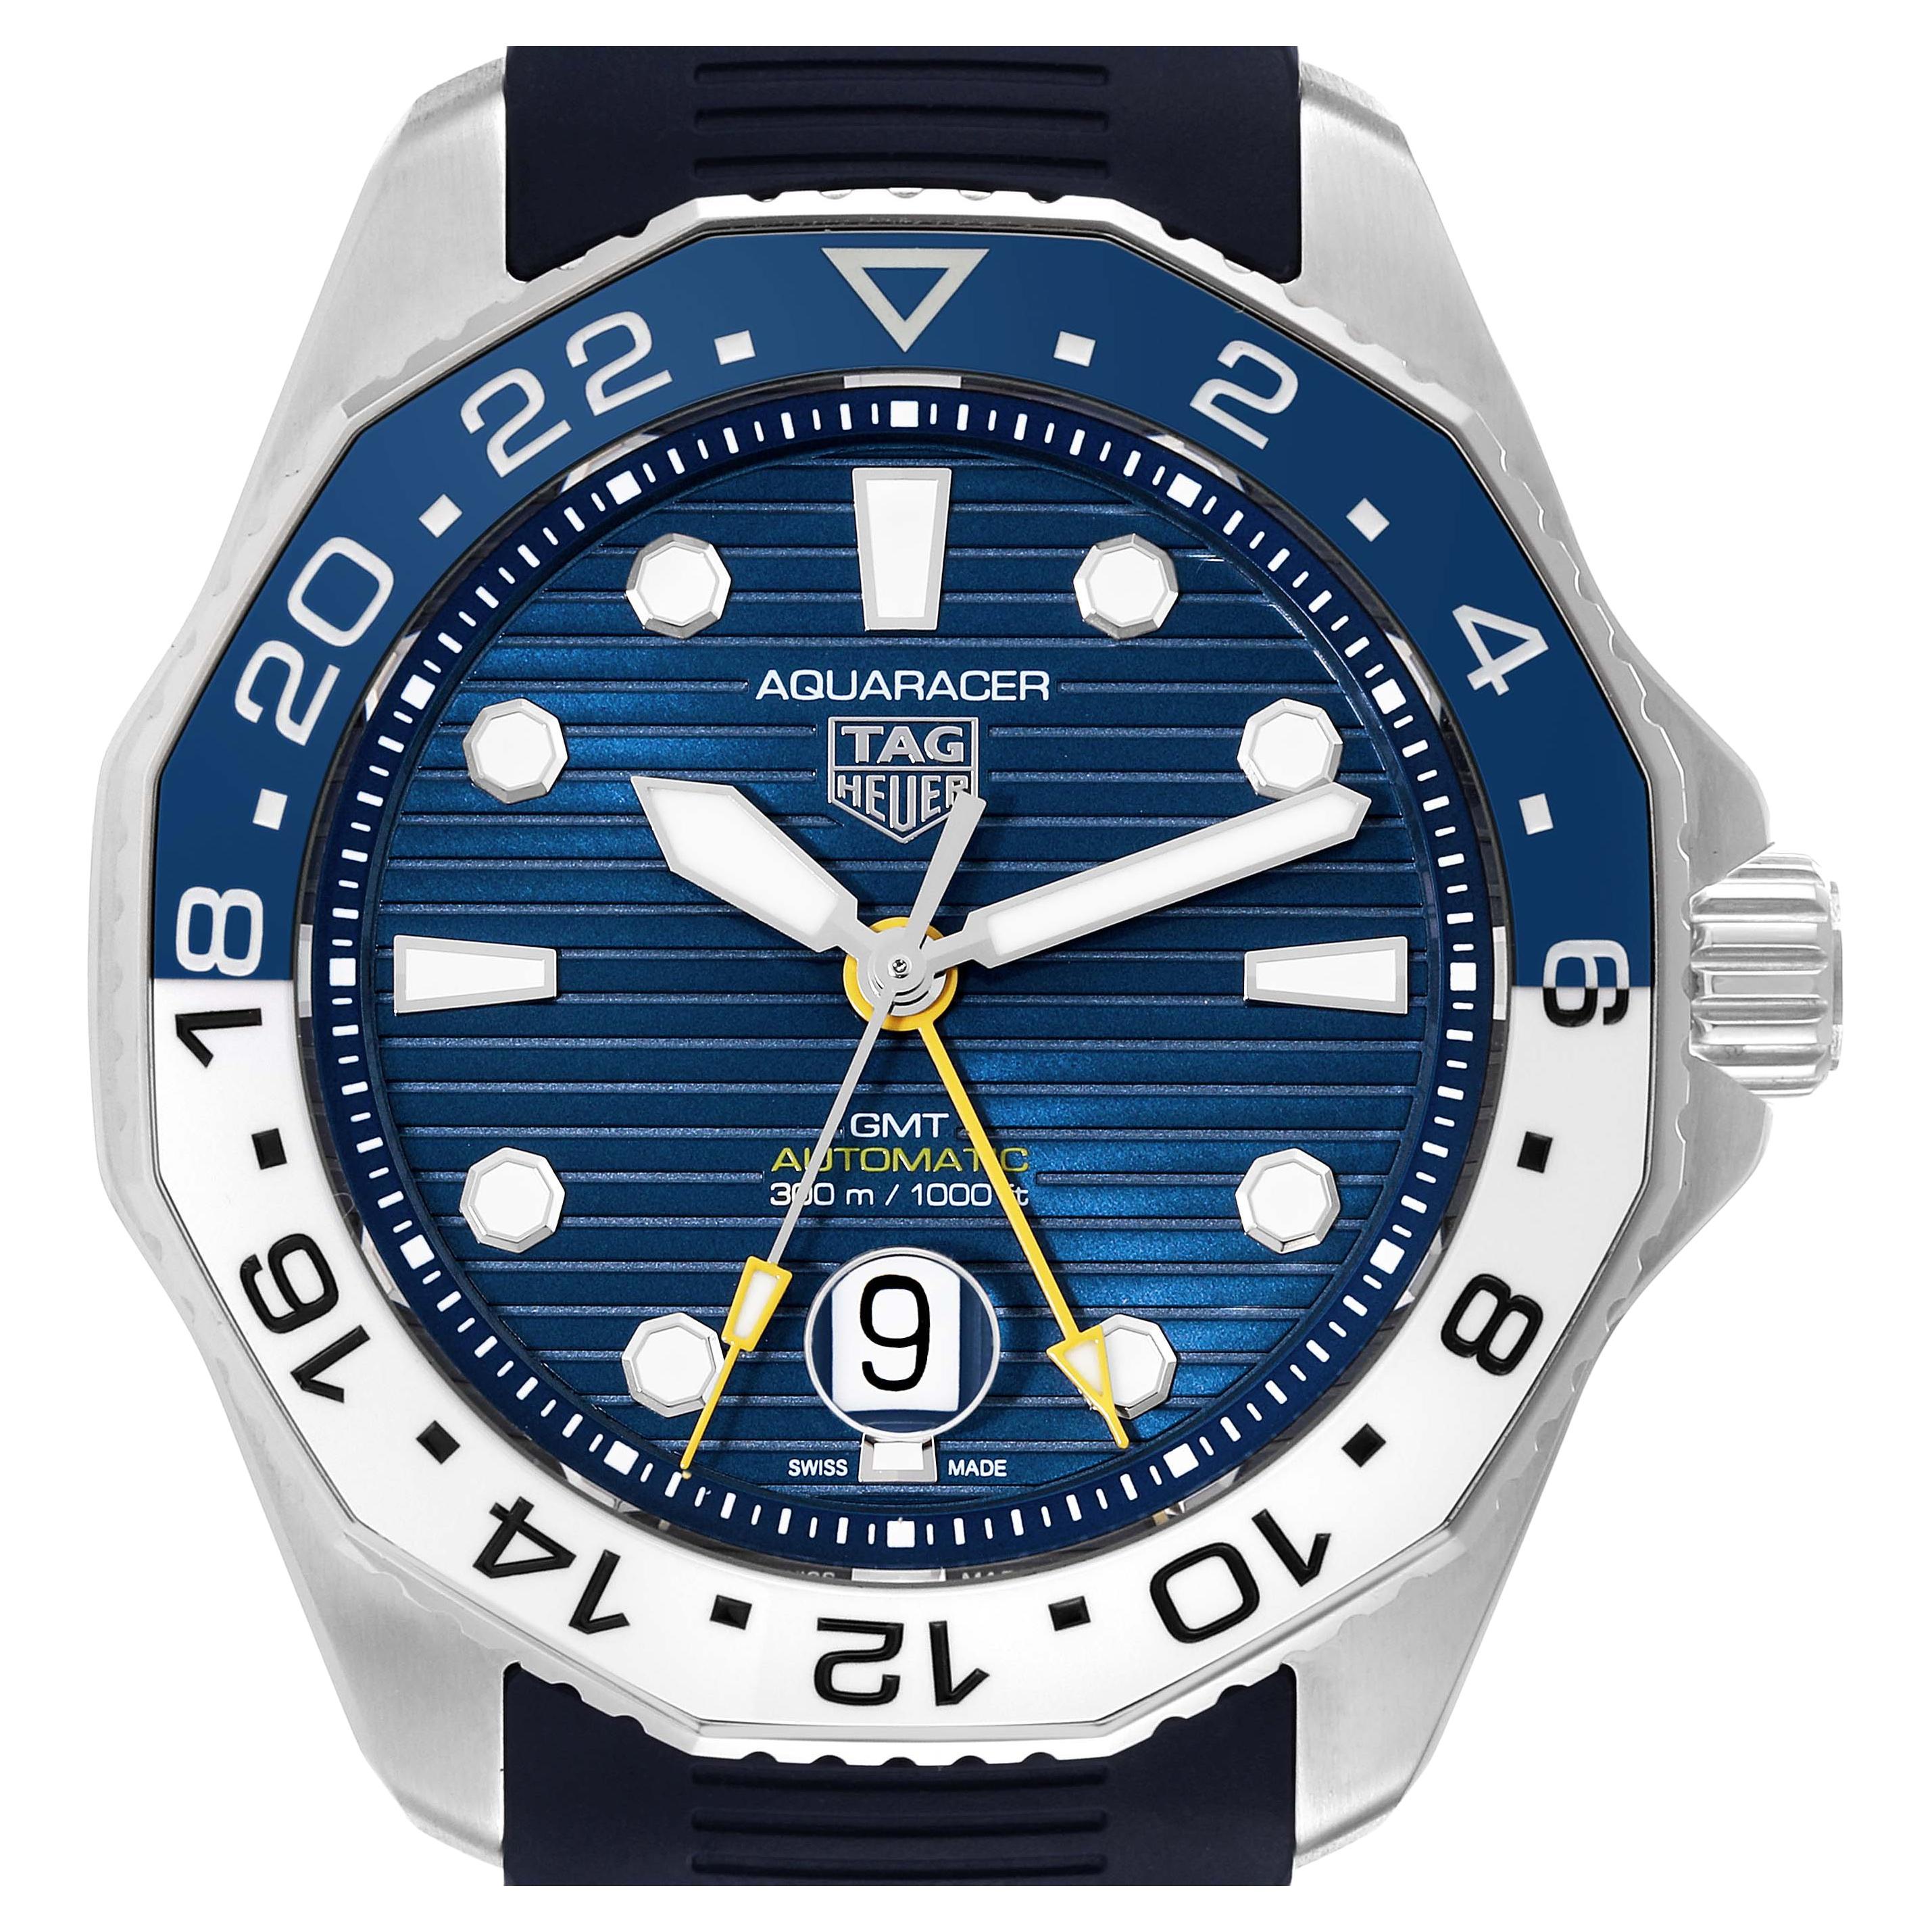 Tag Heuer Aquaracer Professional GMT Blue Dial Steel Mens Watch WBP2010 Box Card